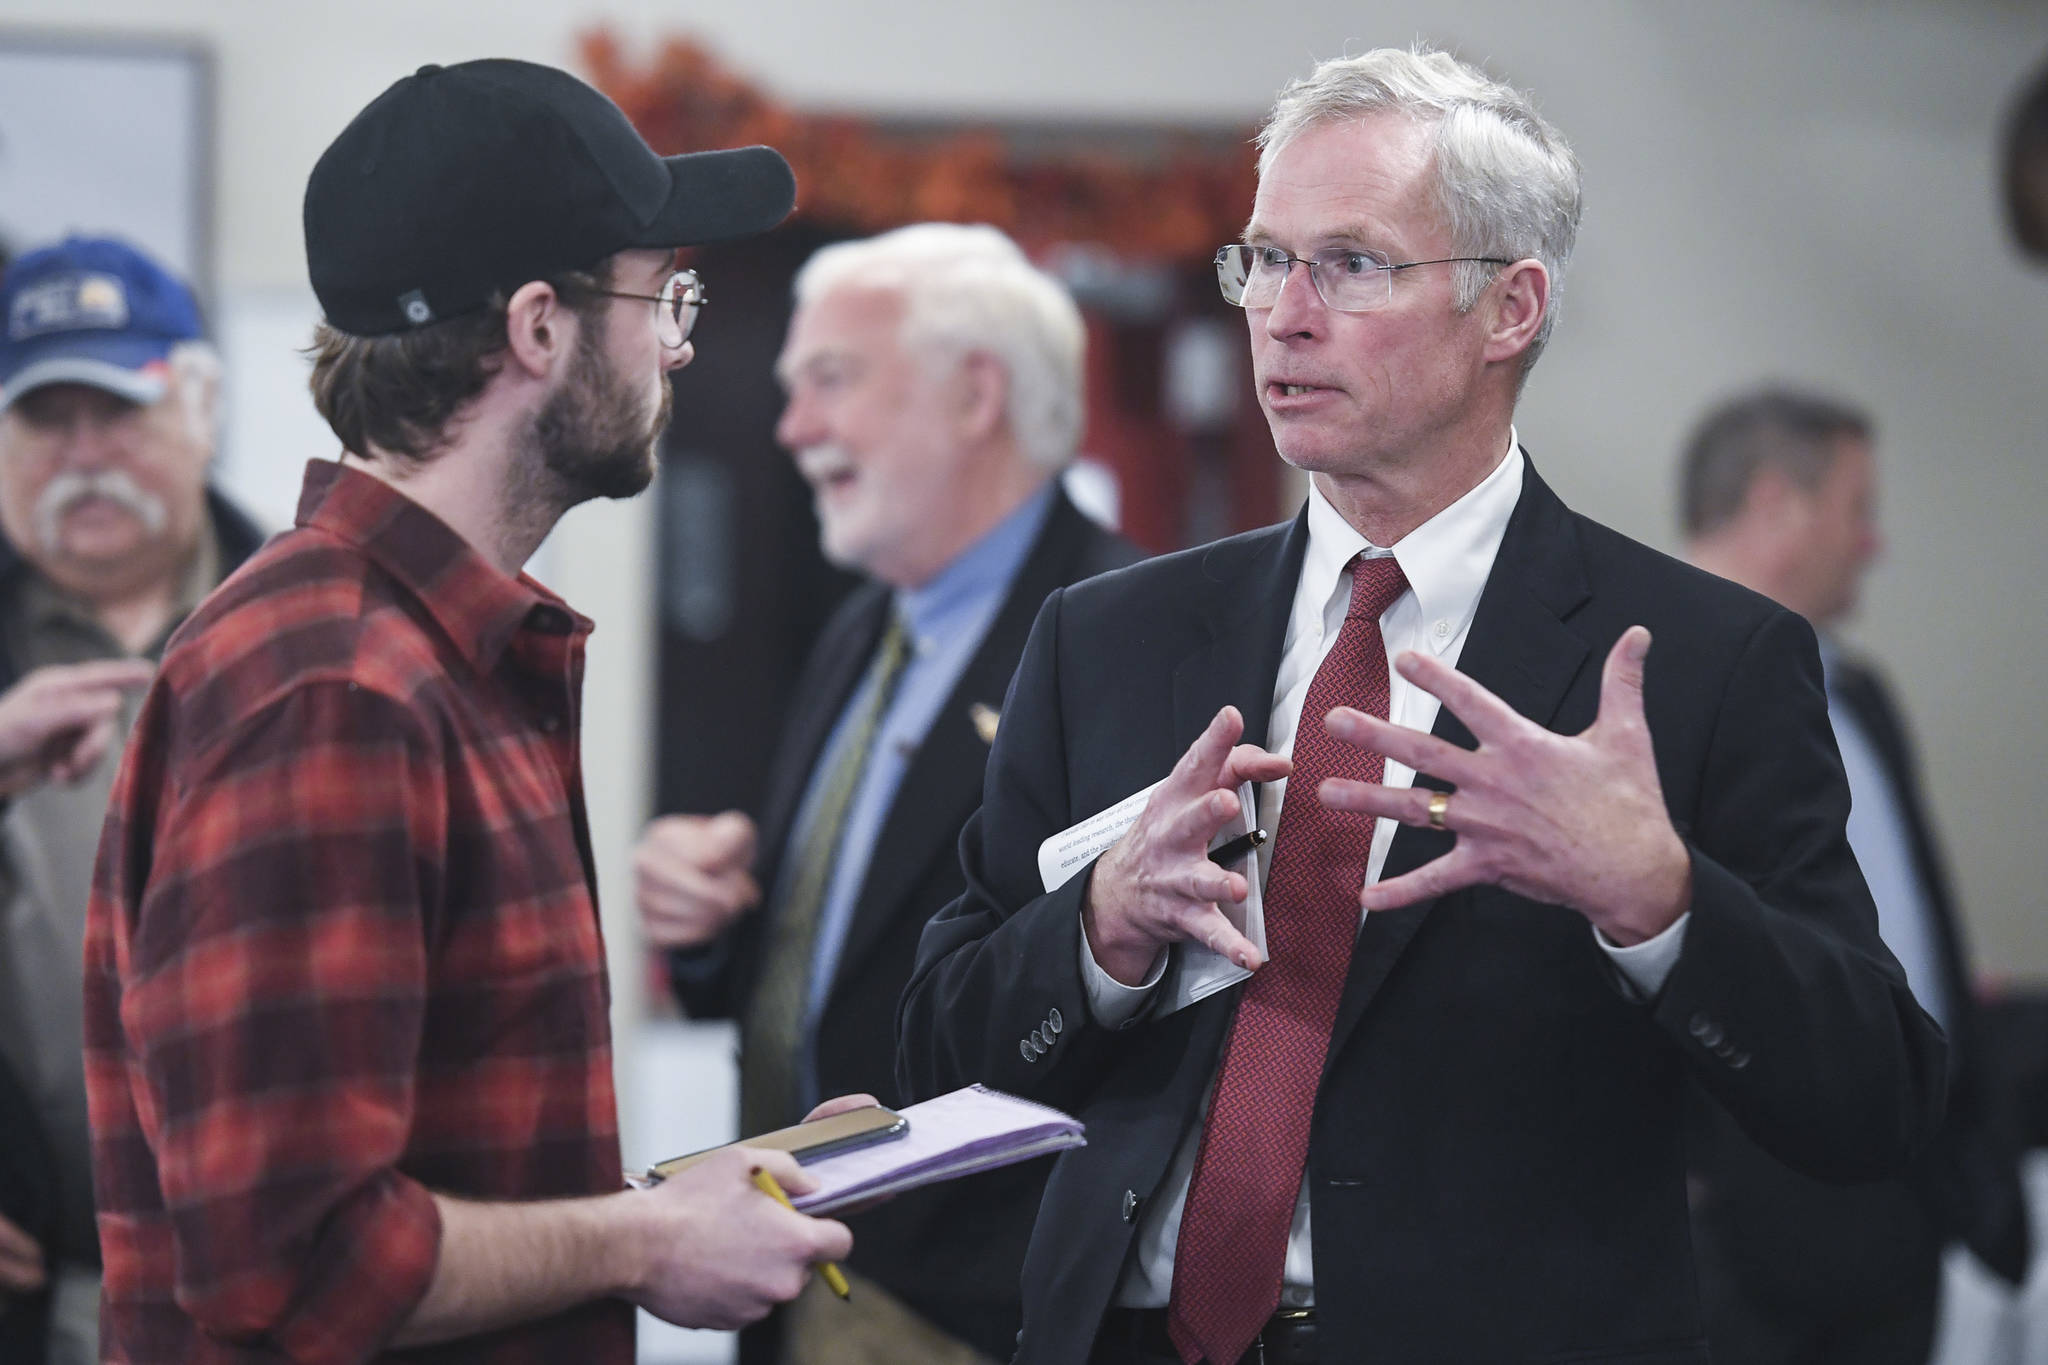 In this November 2019 photo, Jim Johnsen, president of the University of Alaska, is questioned by Kieran Poulson-Edwards, a writer for the Whalesong, the student newspaper at the University of Alaska Southeast, after Johnsen’s speech at the Juneau Chamber of Commerce at the Moose Lodge. (Michael Penn | Juneau Empire File)